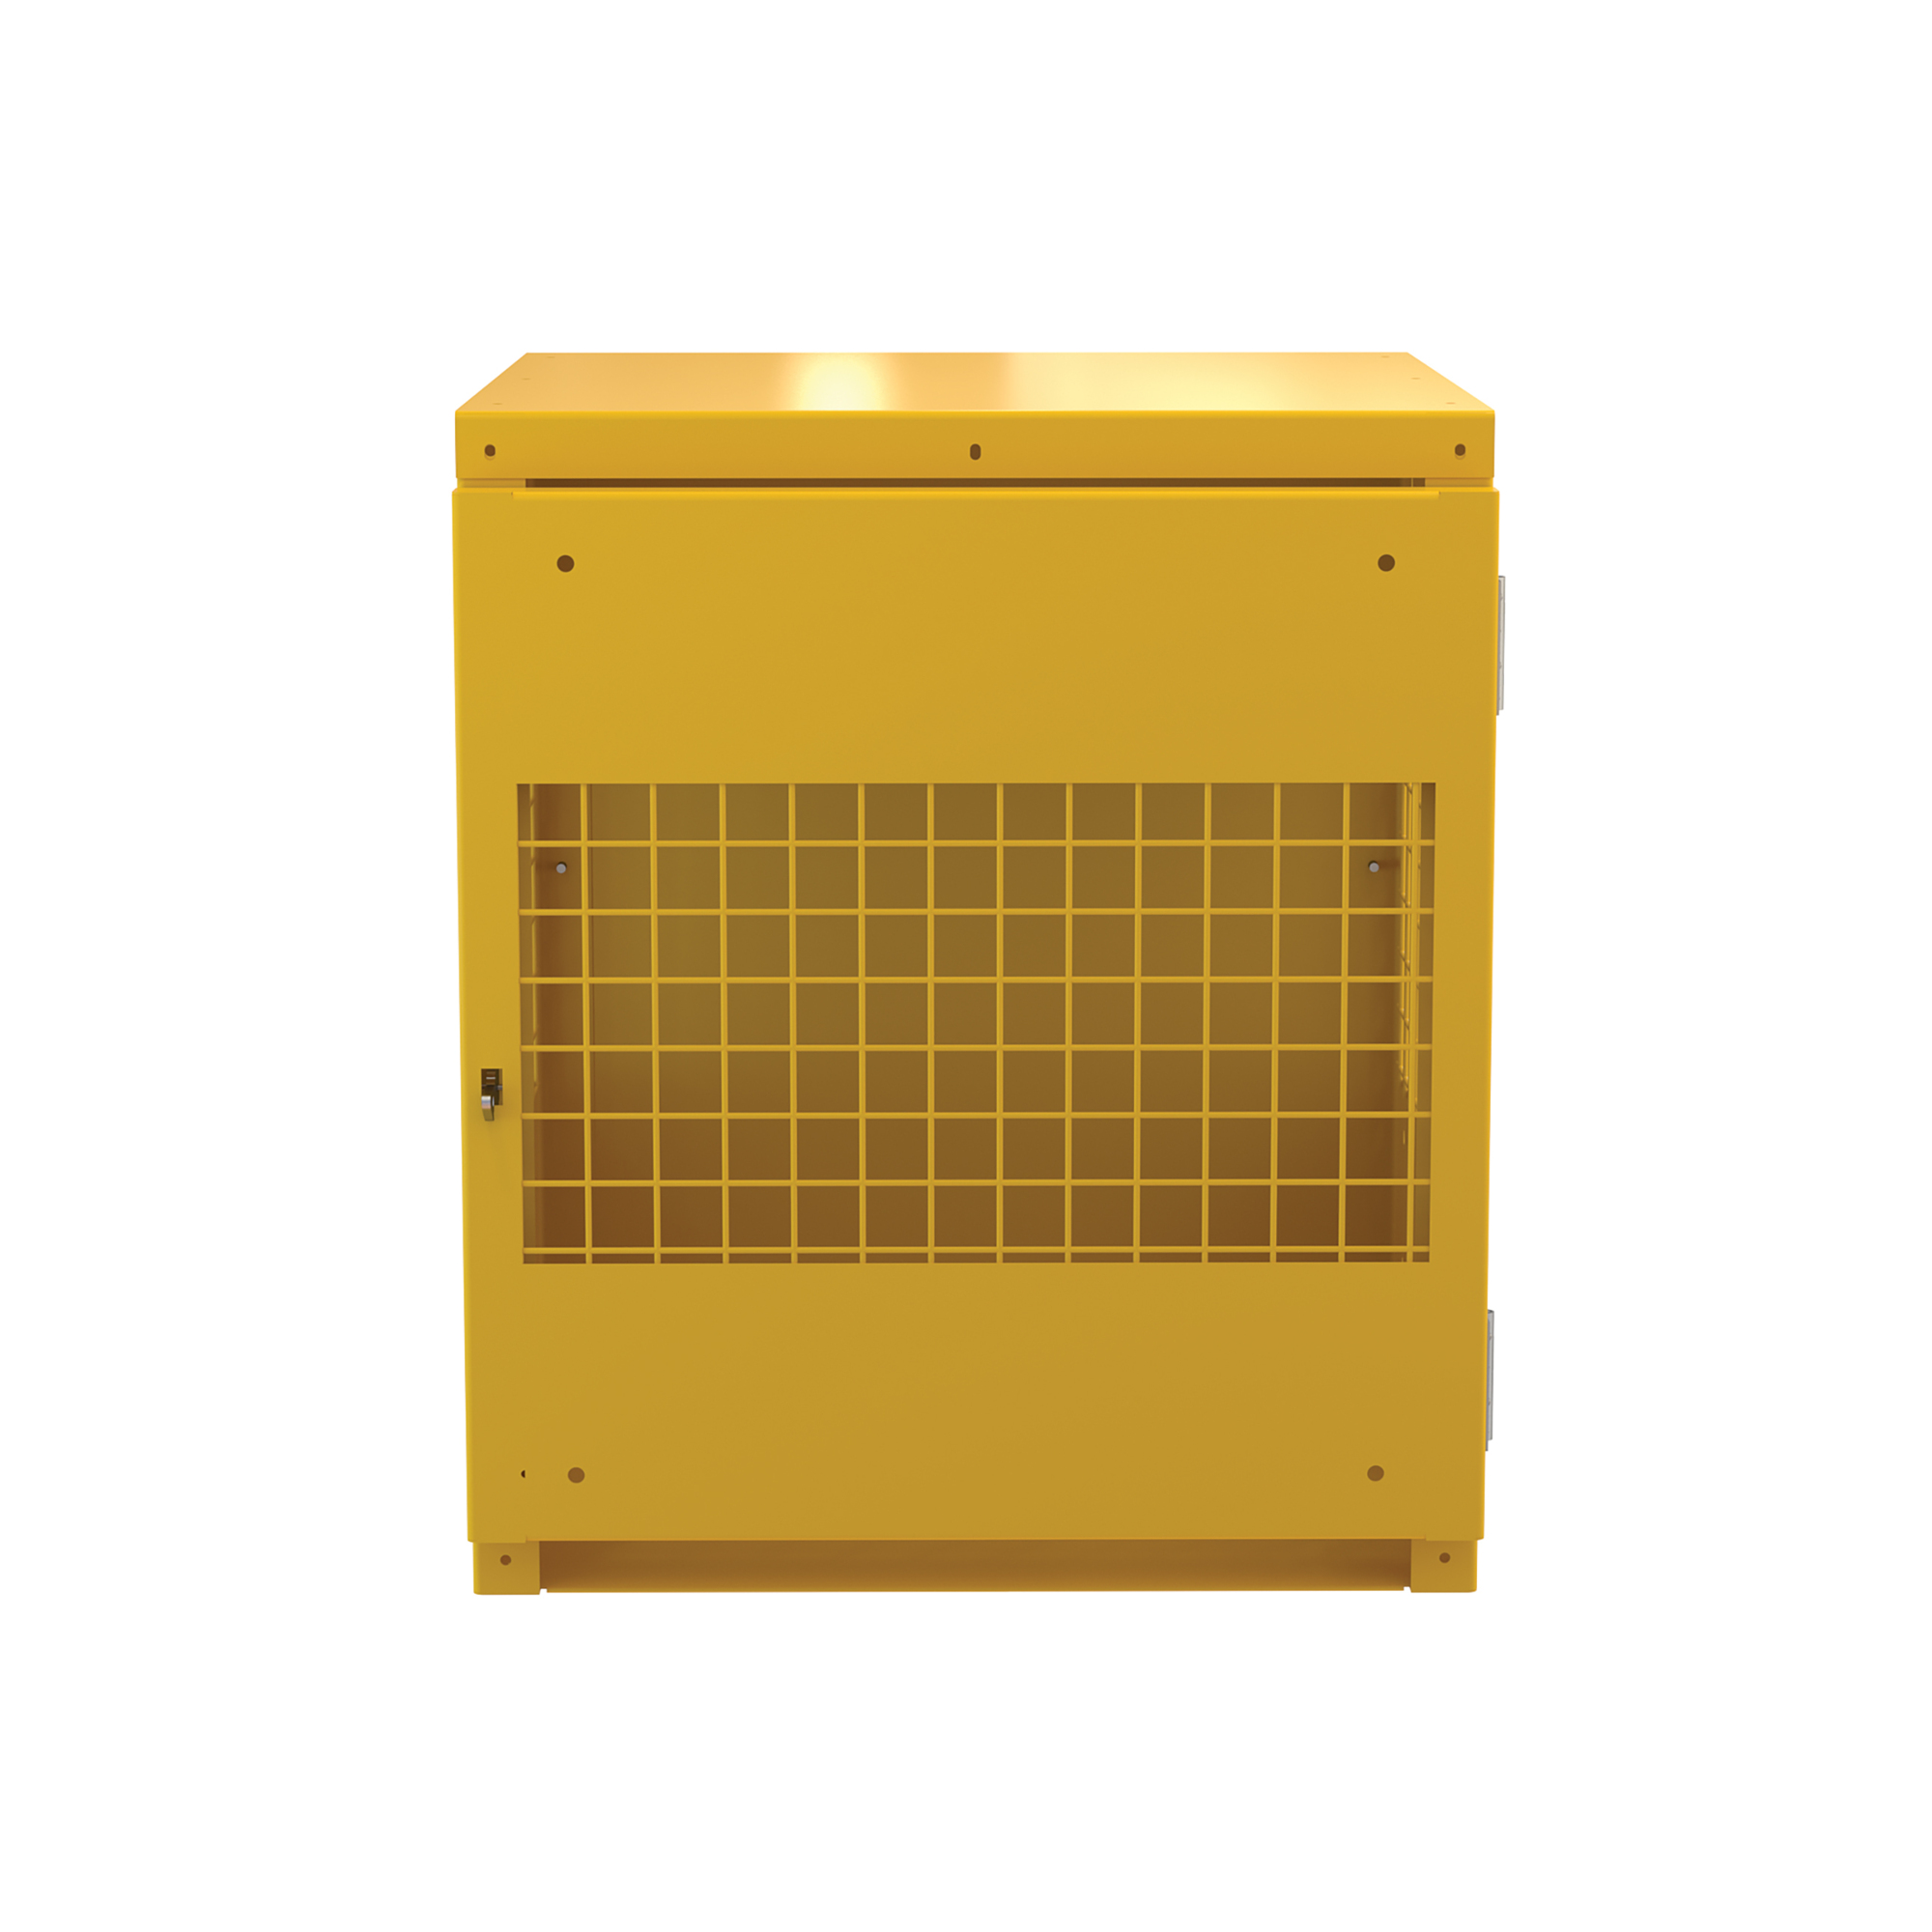 Vestil, 4 Capacity vertical cylinder cabinet, Height 35.25 in, Width 30 in, Color Yellow, Model CYL-V-4